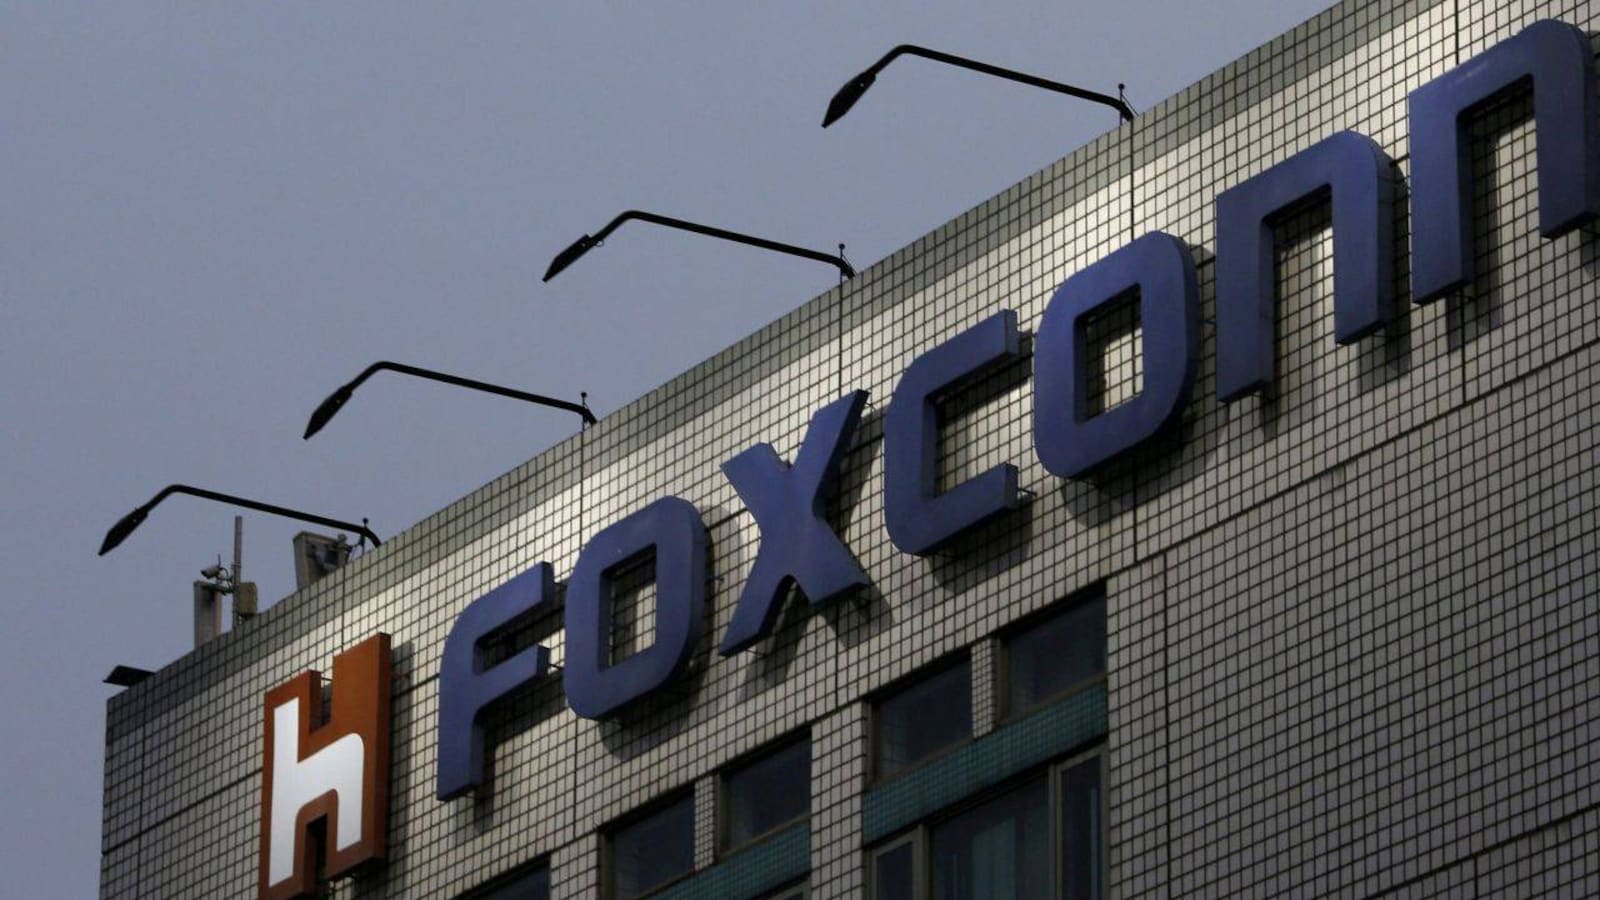 The Apple Supplier Foxconn Ups Its Investment Proposal in Telangana to $550 Million.